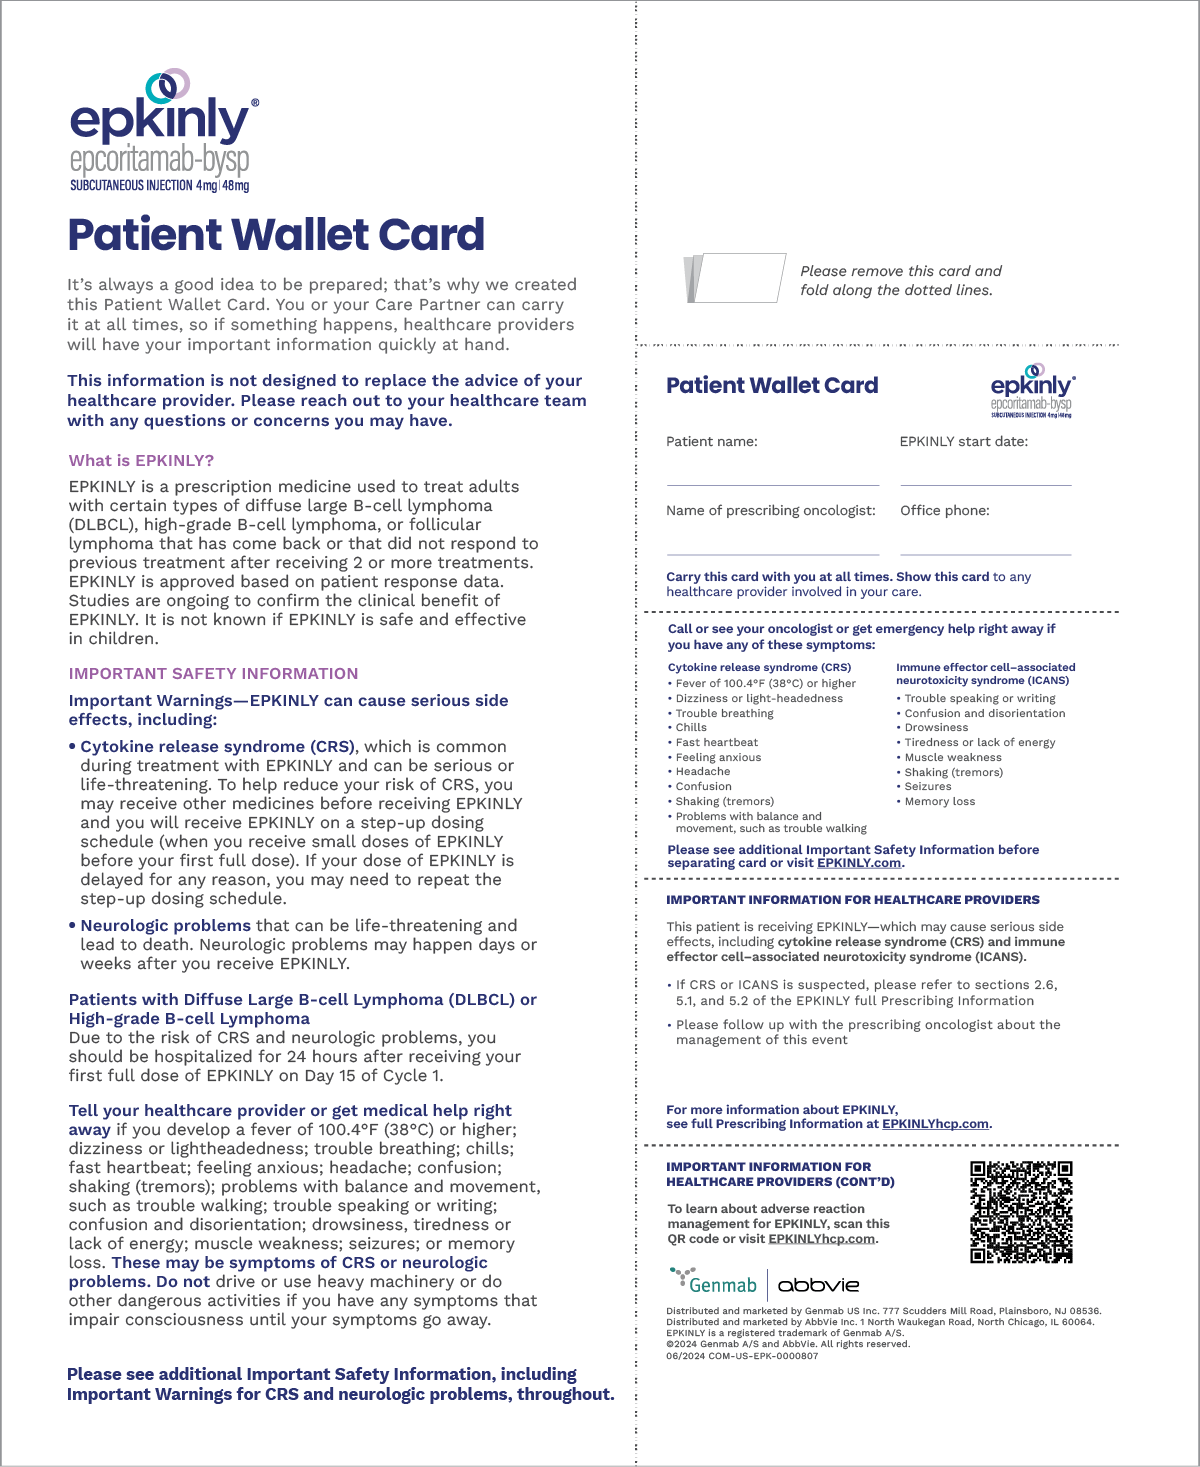 Download the EPKINLY® Patient Wallet Card.